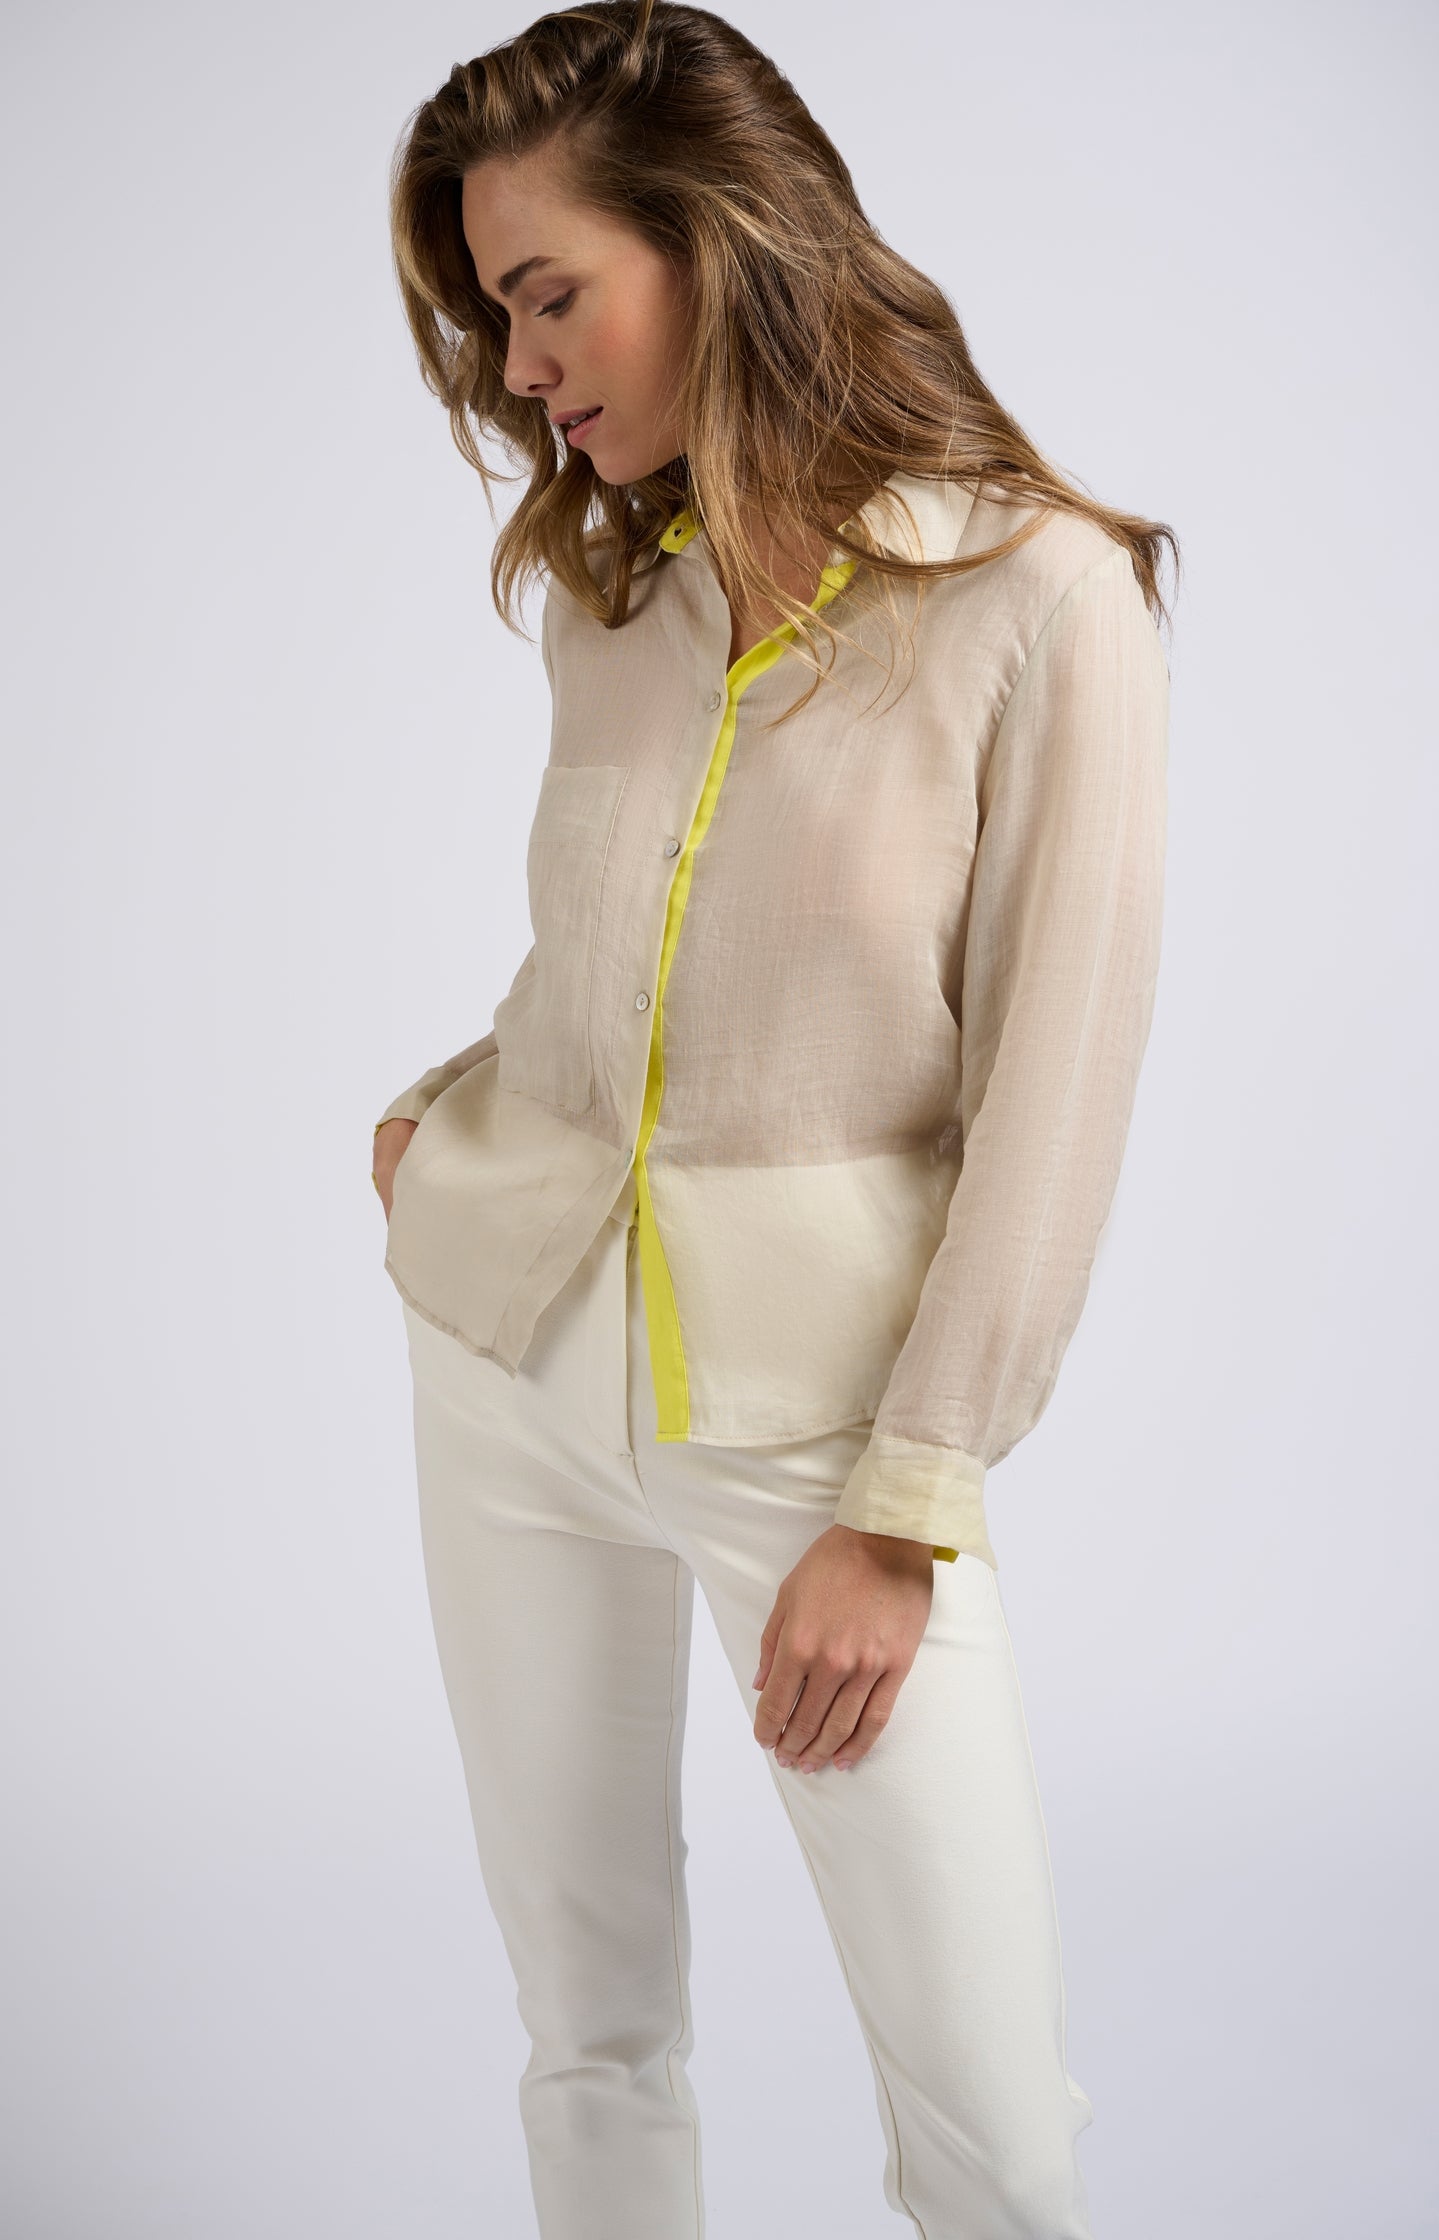 Long-sleeve blouse with a chest pocket - Type: lookbook